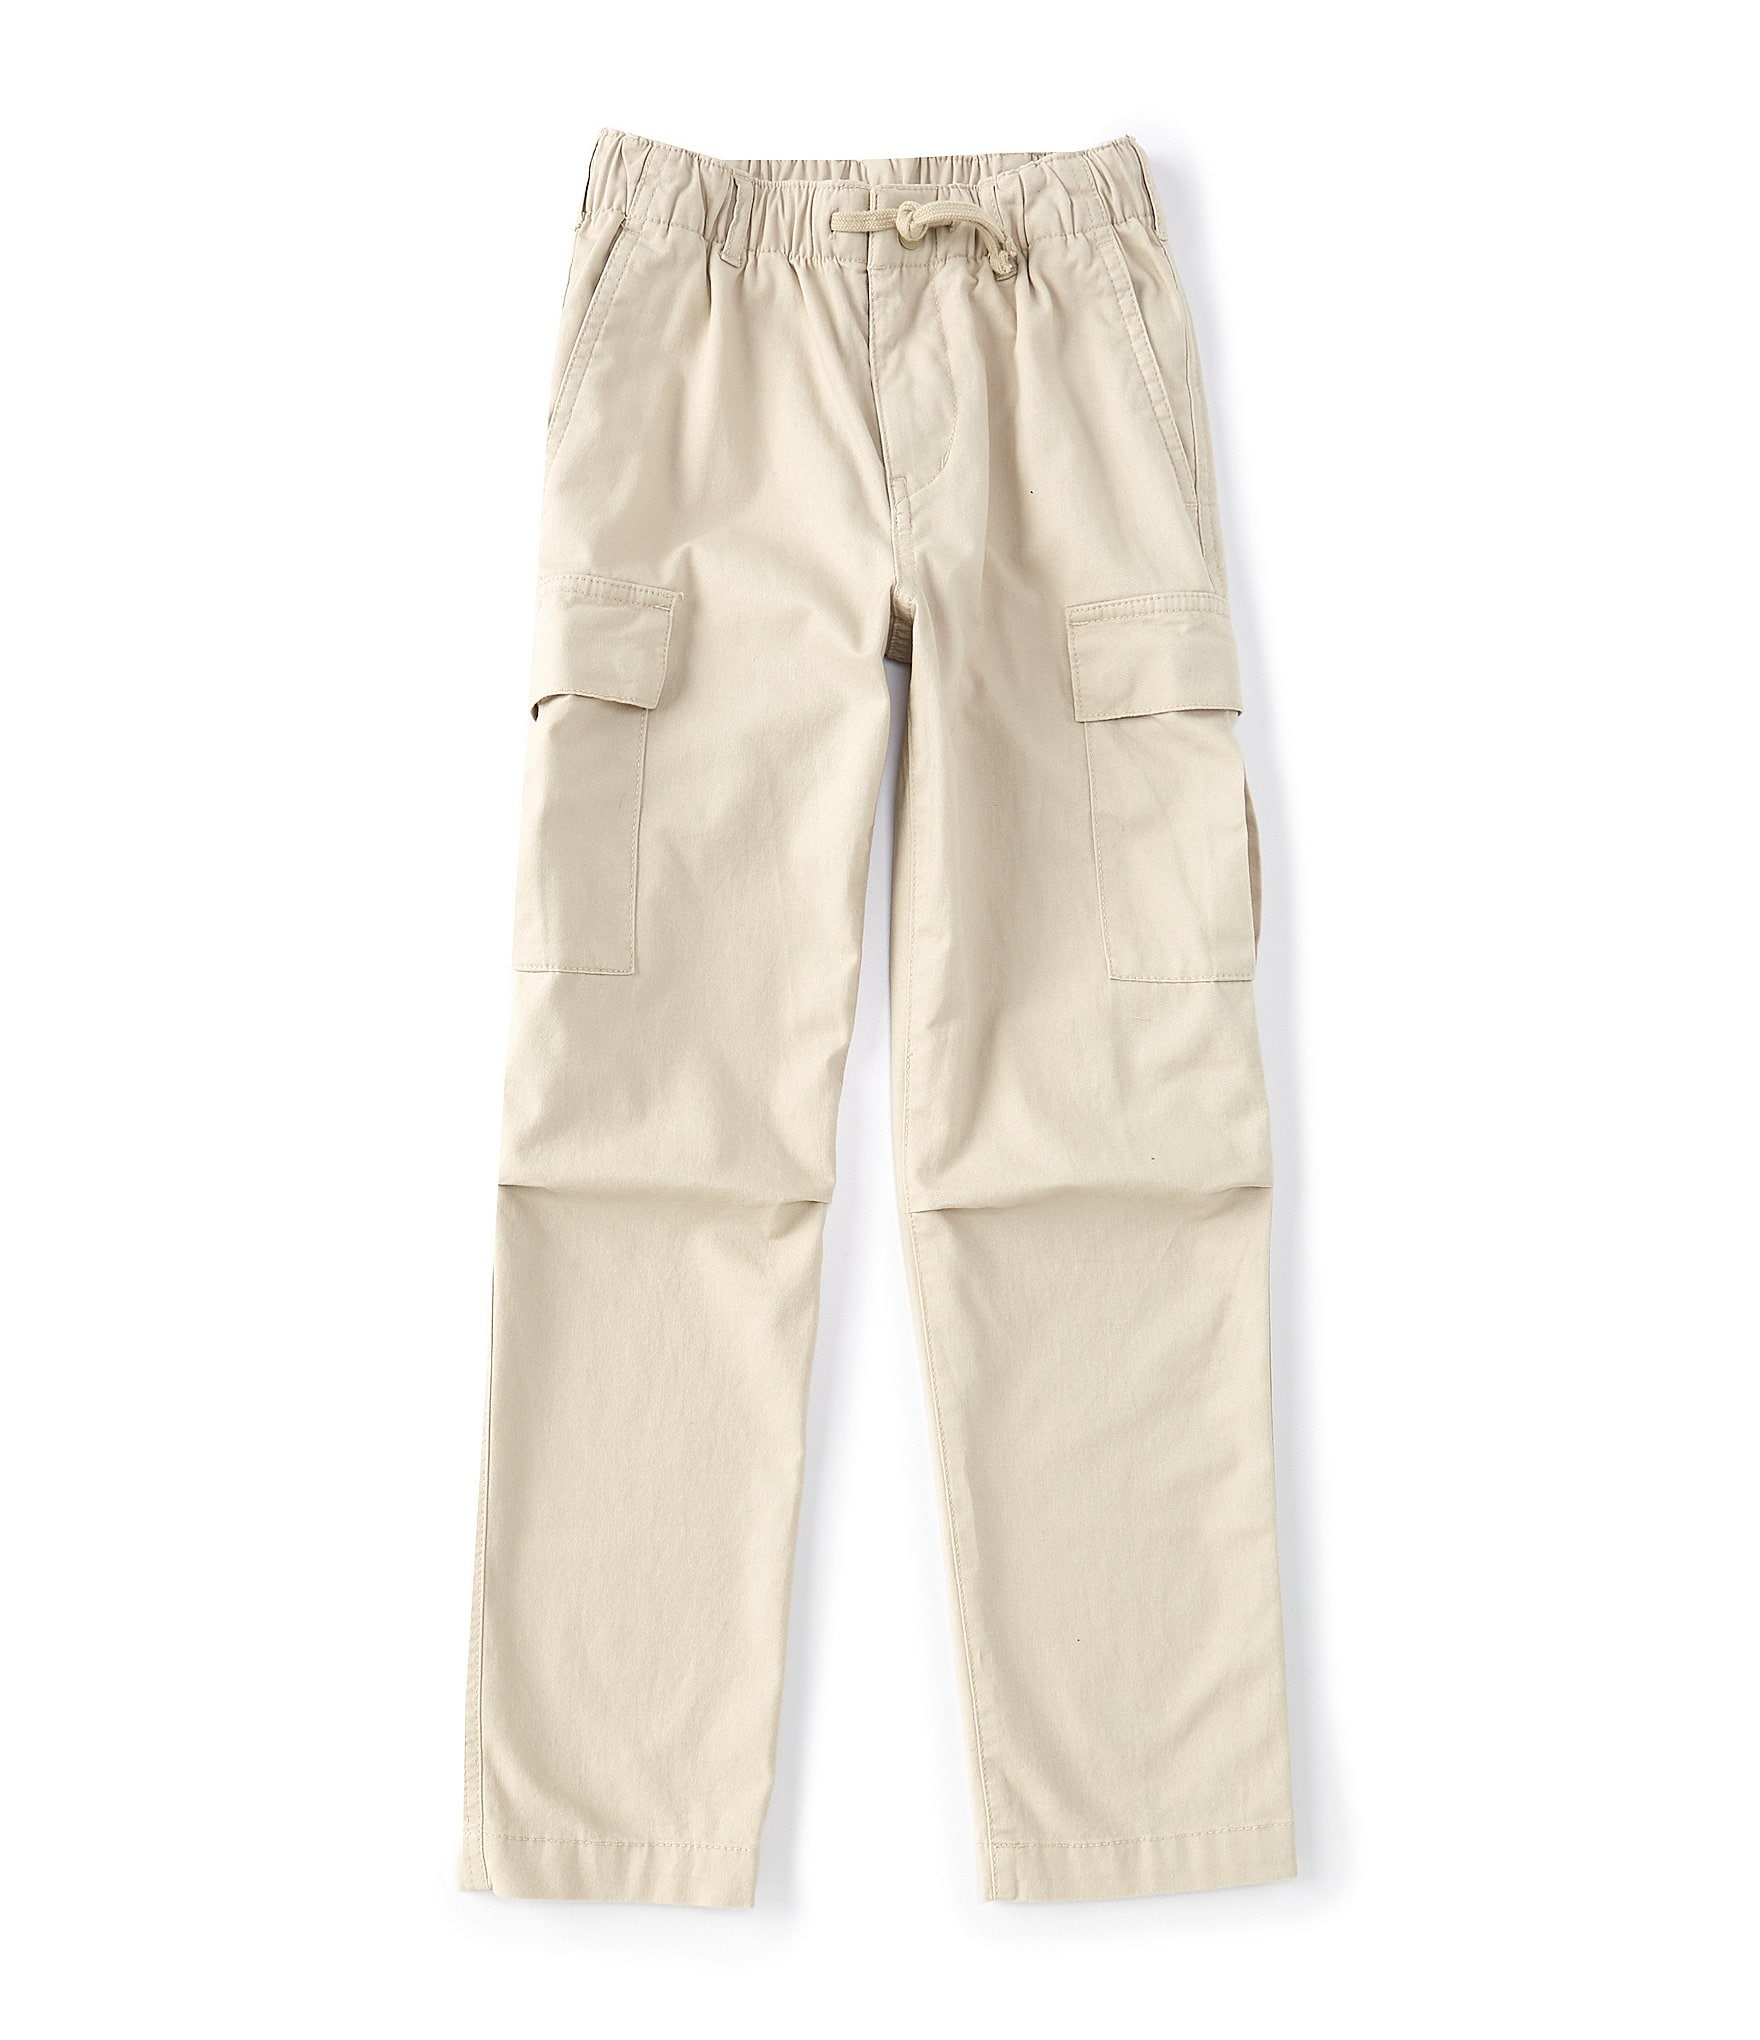 New Child Kids Spring/Fall cargo Pants Boys pocket Casual Pants Trousers  gift | eBay